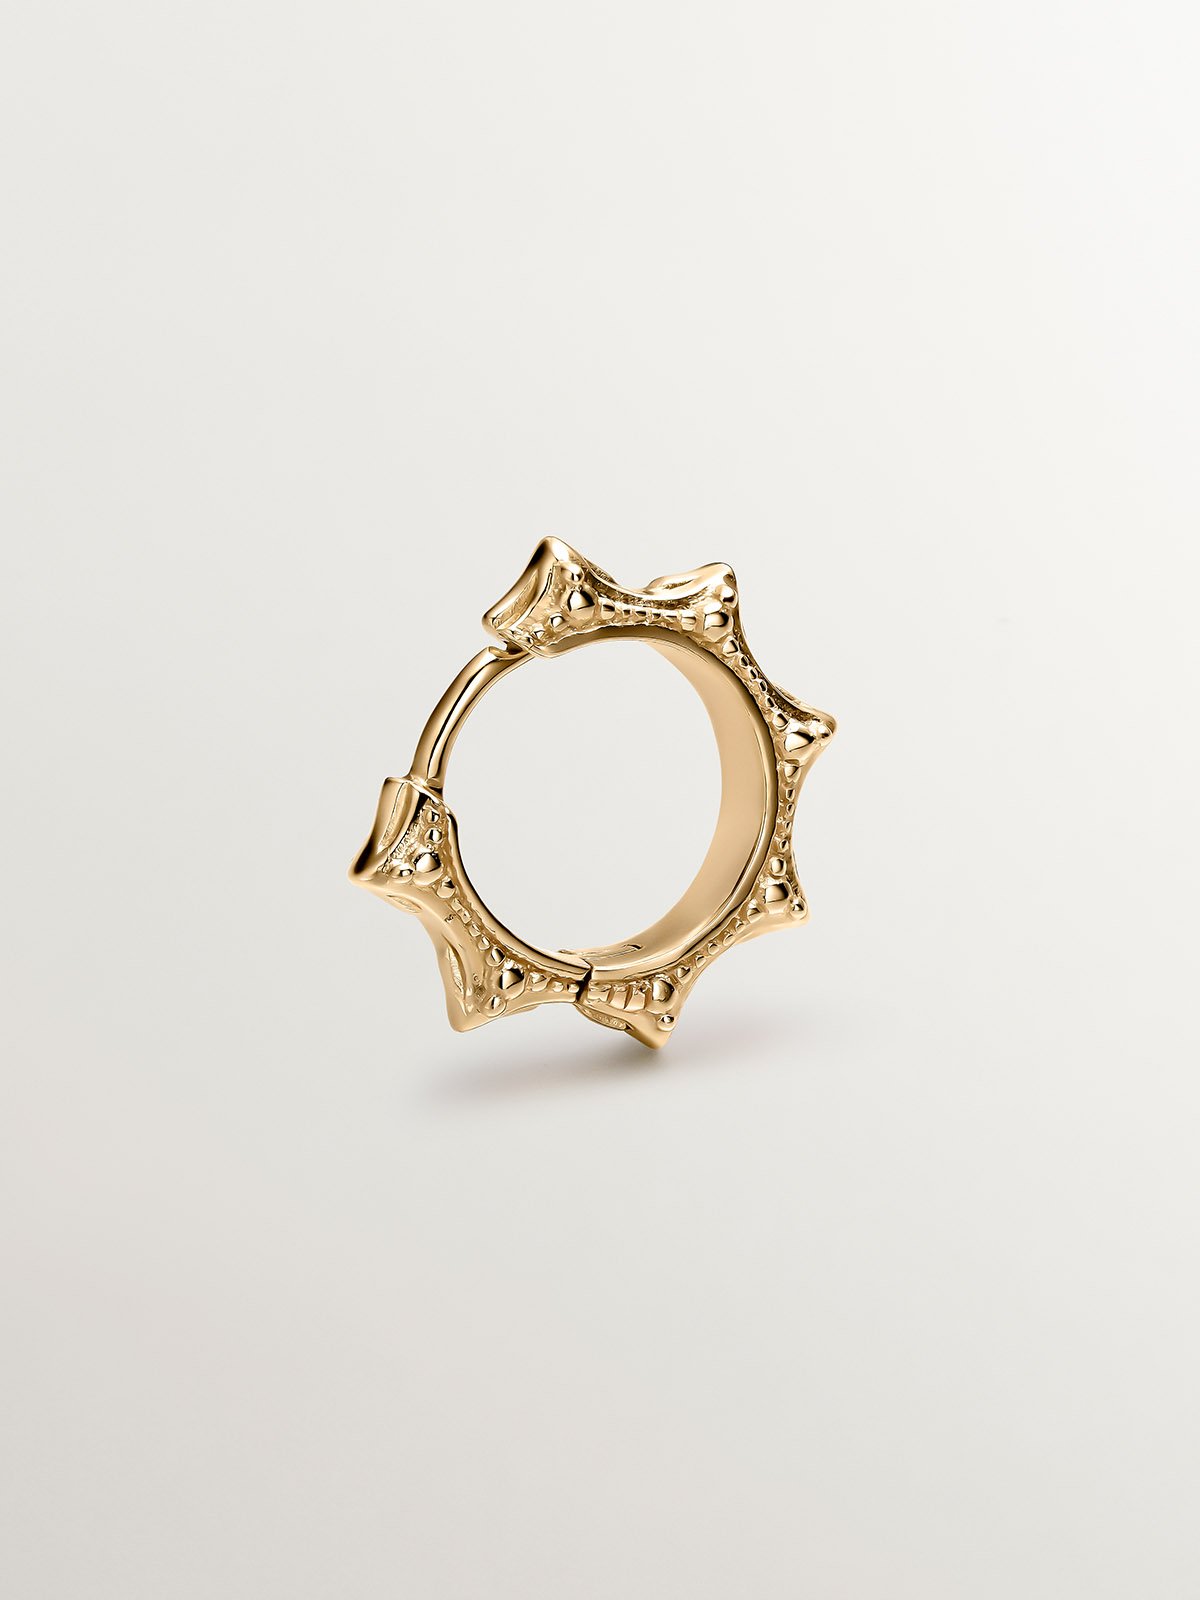 Individual 9K yellow gold earring in star shape.